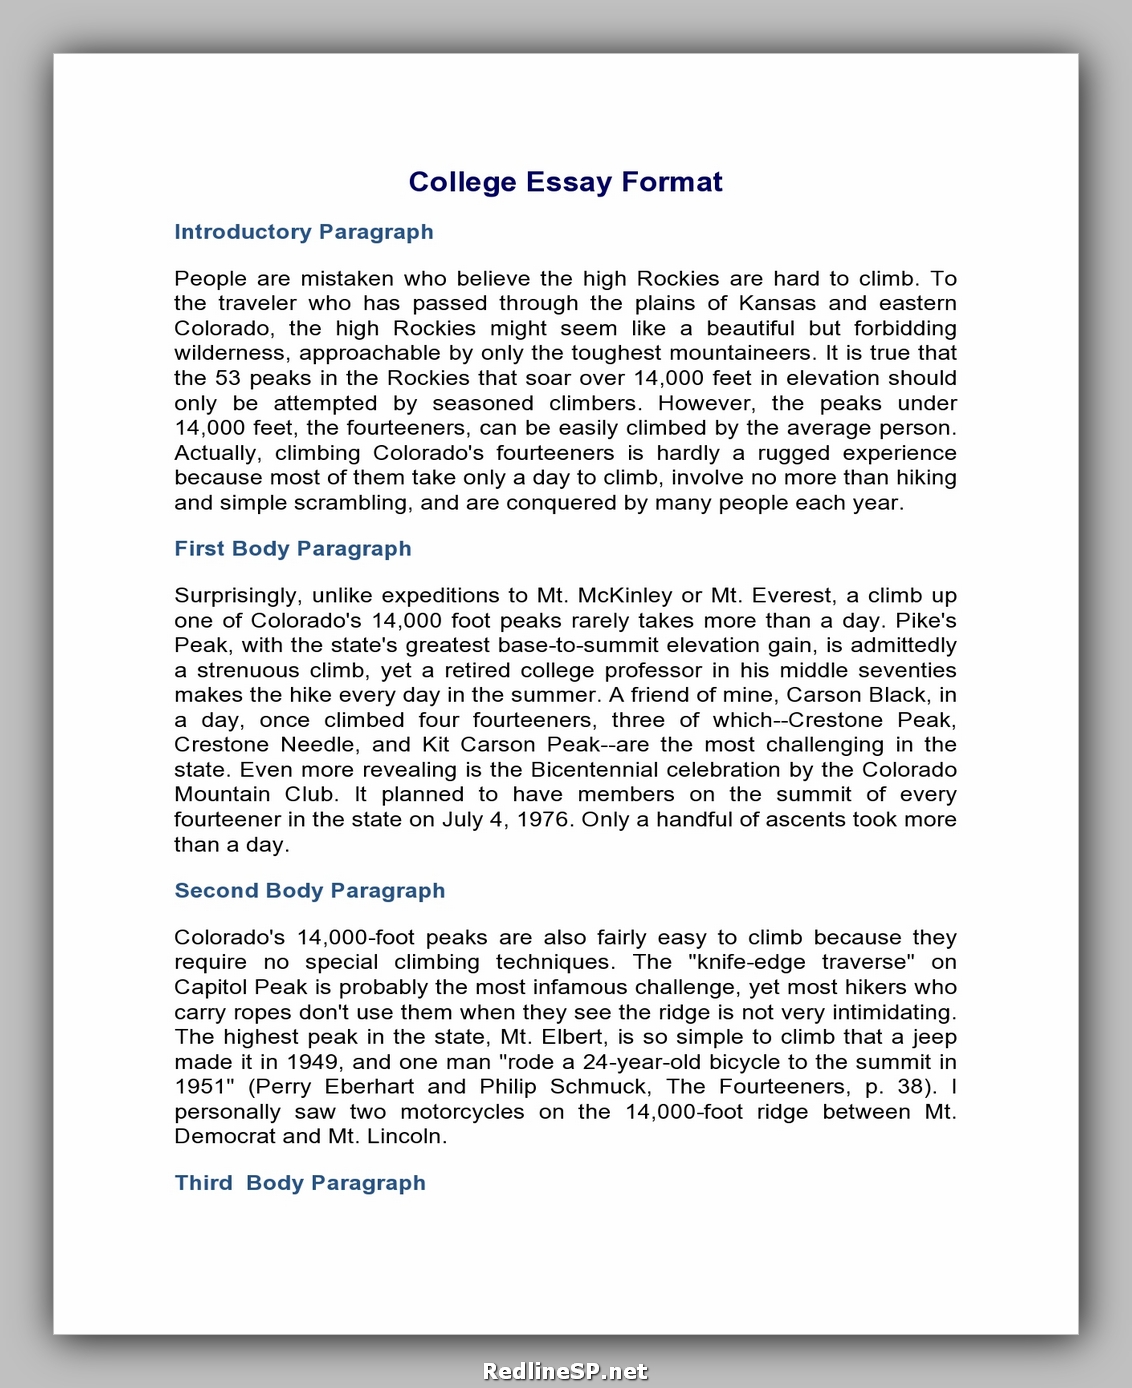 samples of great college essays